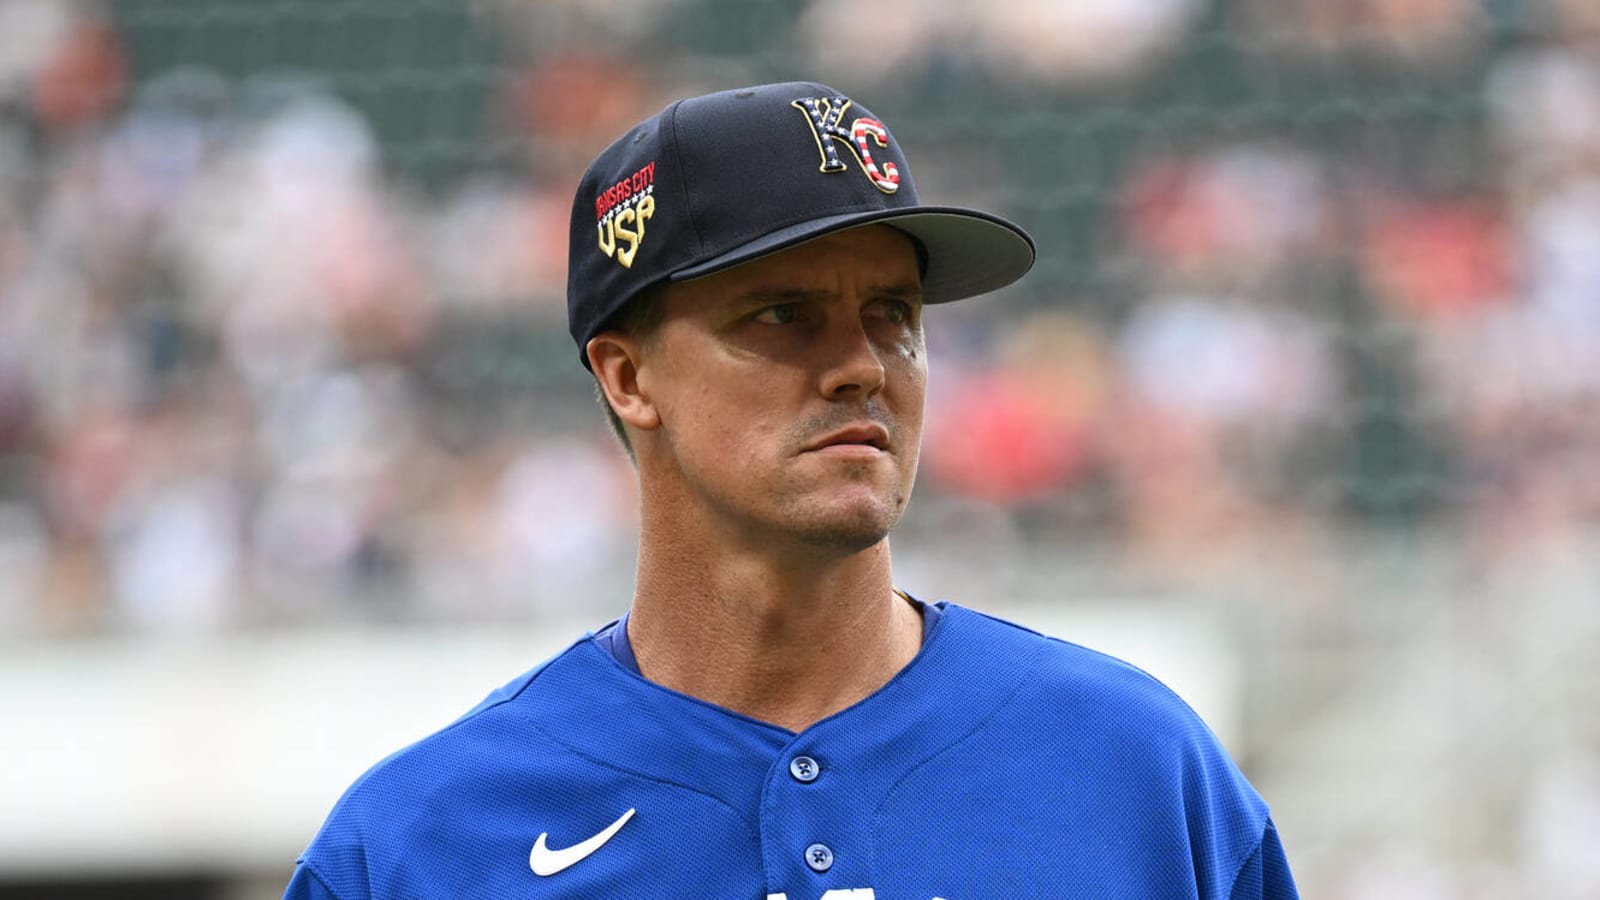 ZACK GREINKE IS BACK WITH THE ROYALS! (Former Cy Young winner